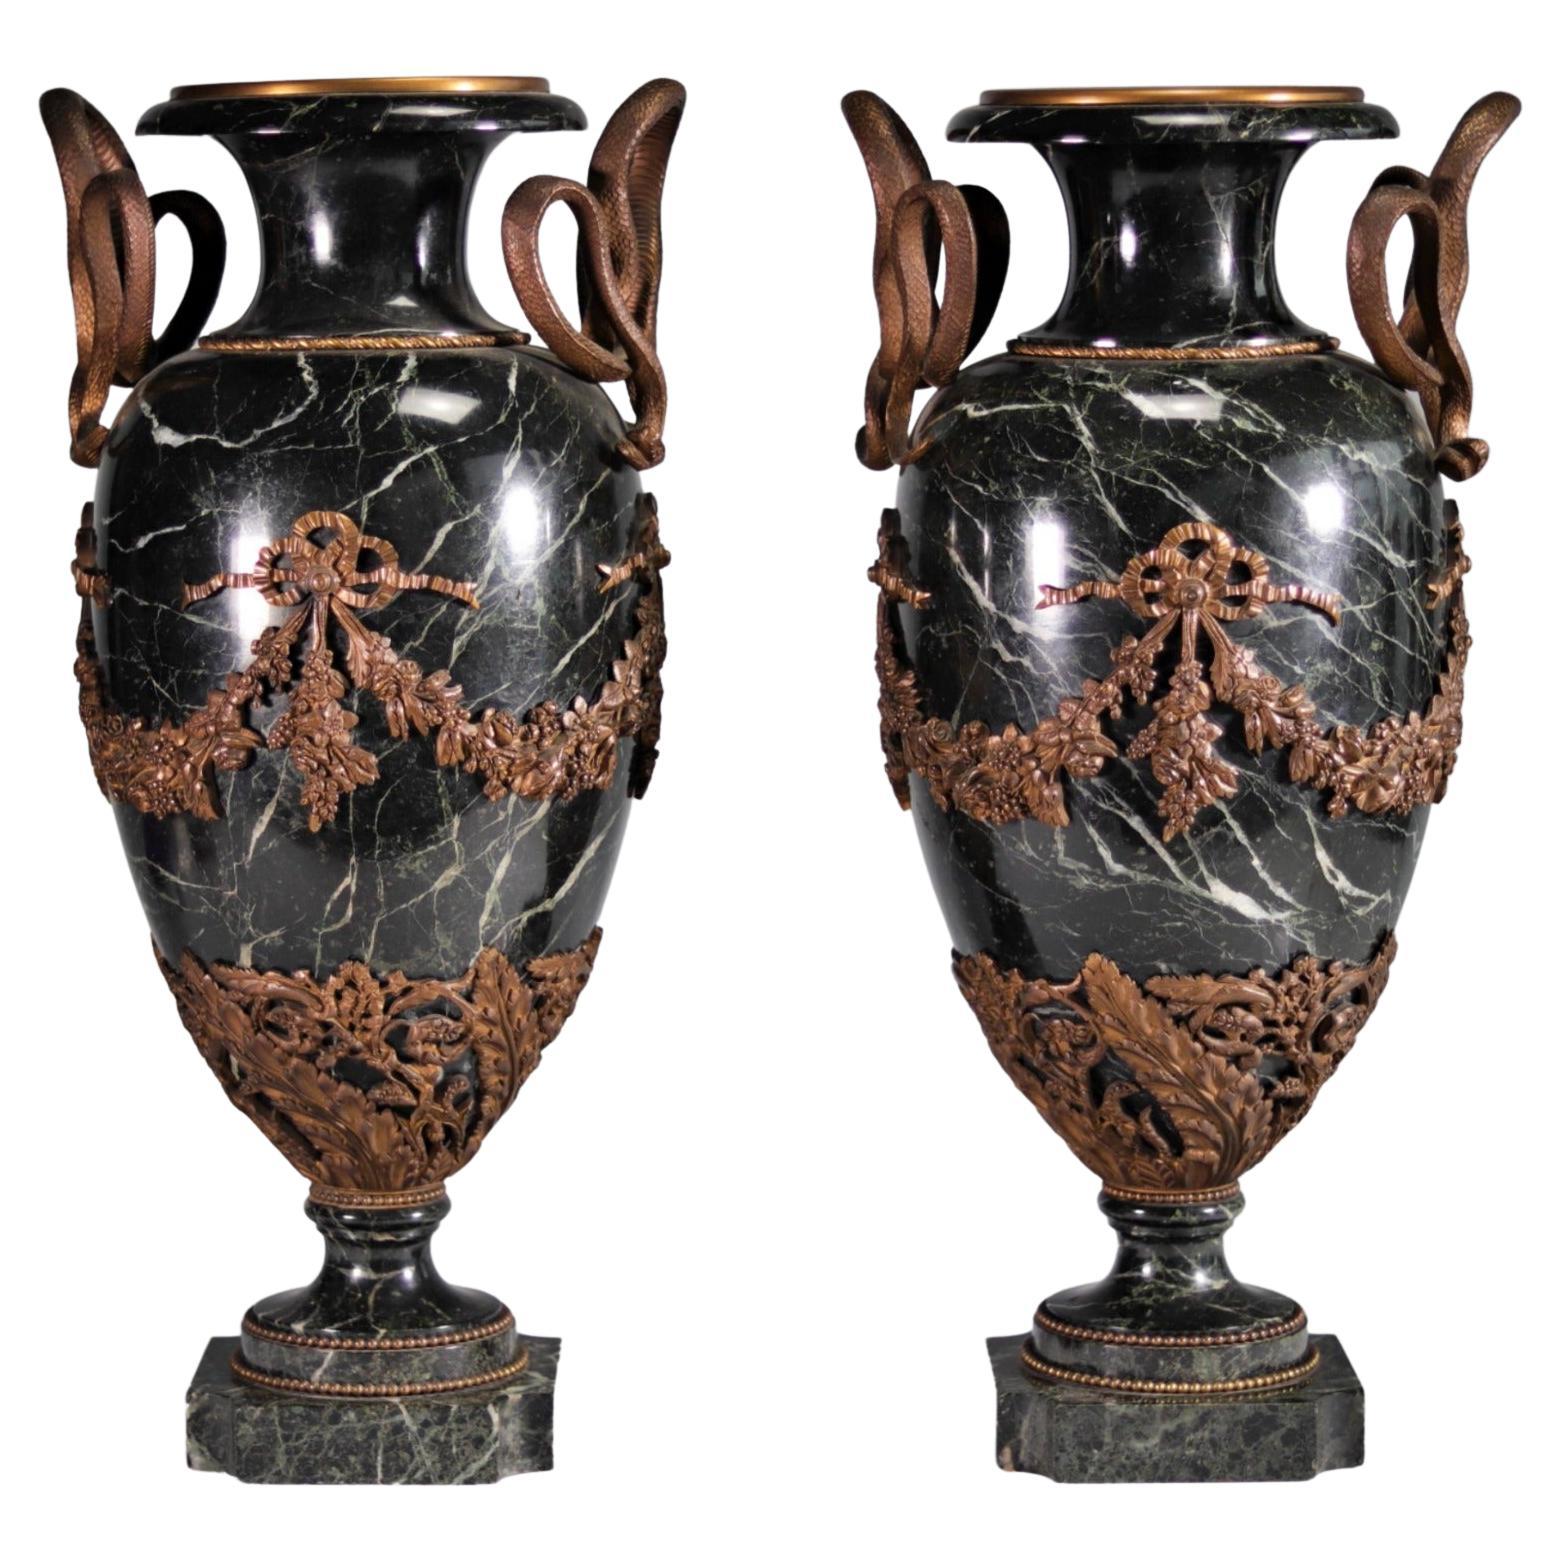 Amazing Pair of Marble and Bronze Cassolettes 19th Century Empire, France